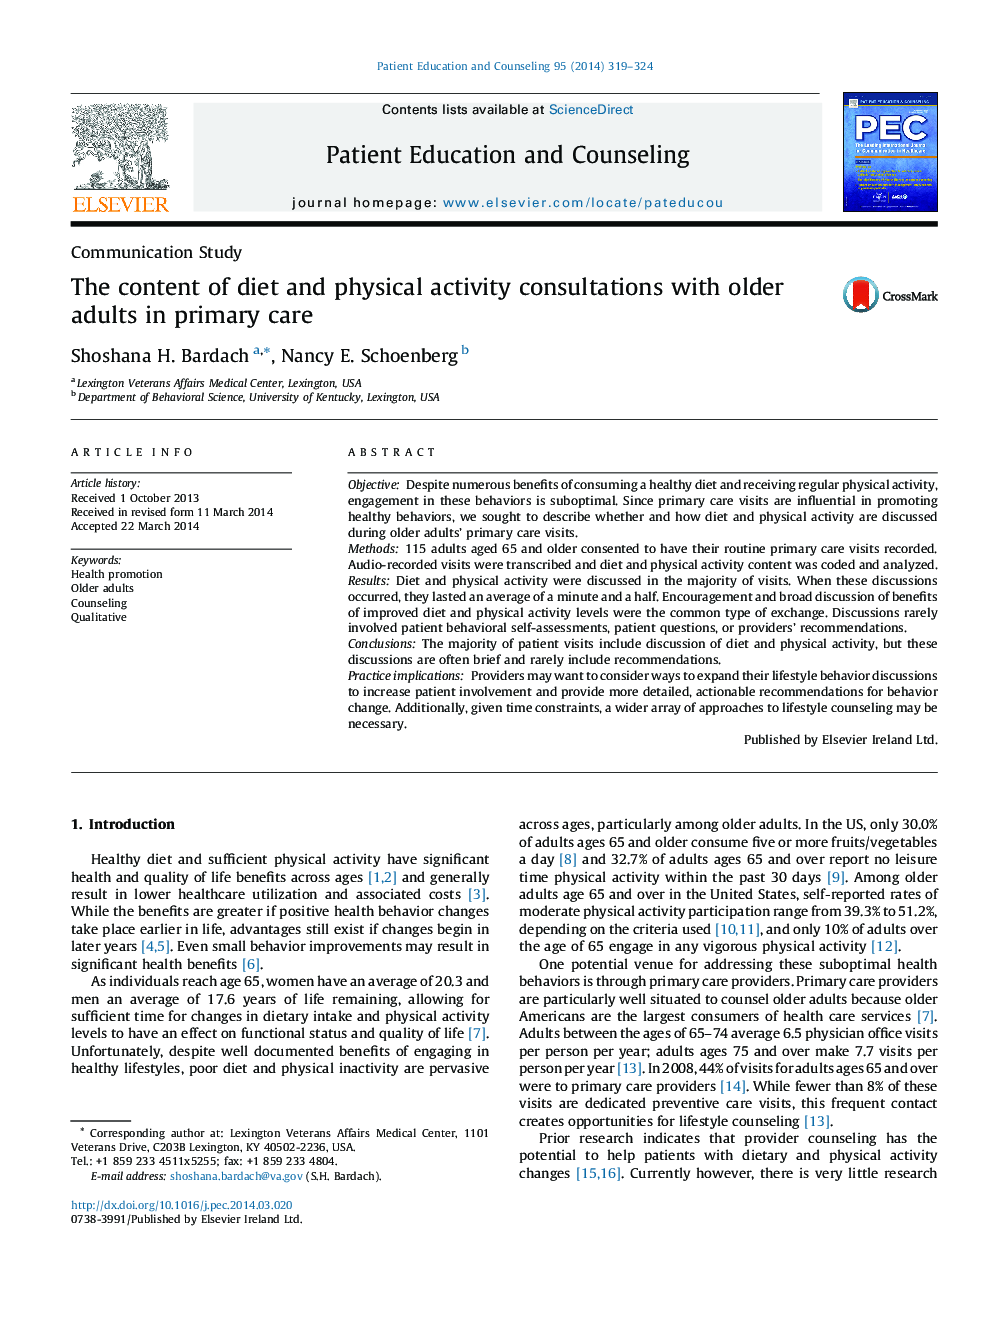 The content of diet and physical activity consultations with older adults in primary care